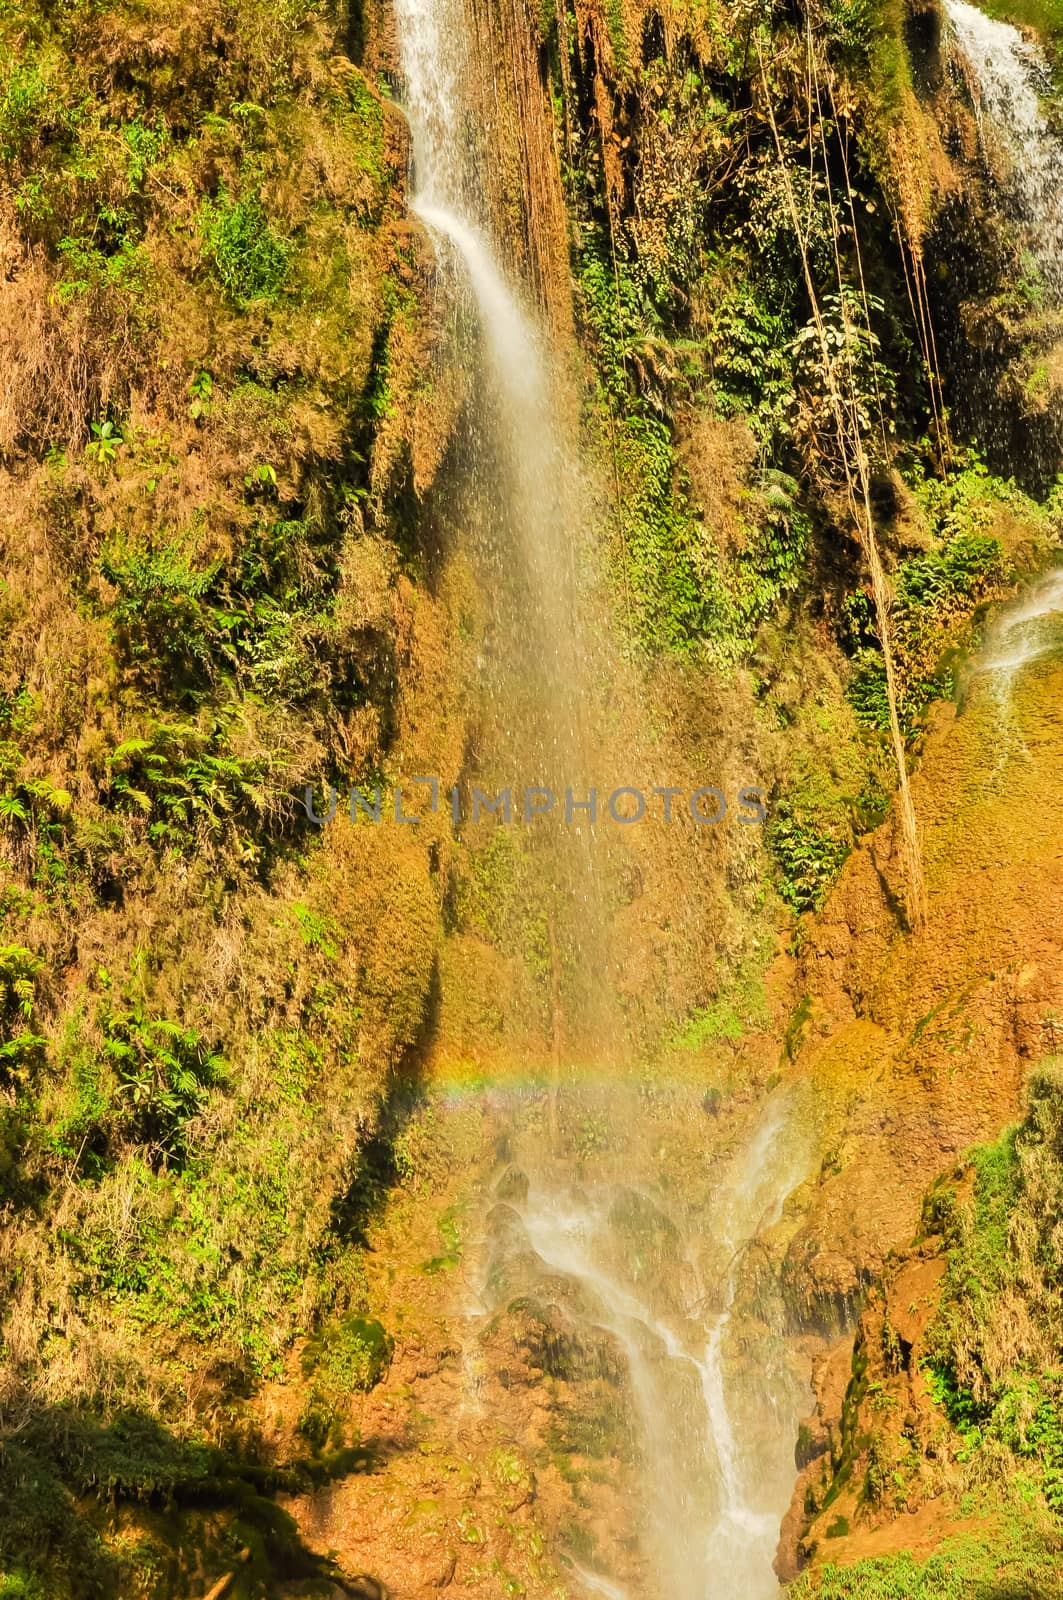 Rainbow over small white current at Dai Yem (Pink Blouse) waterfall in Muong Sang Commune, Moc Chau, Son La, Vietnam. Fall gushes down its slope with small and medium rocks in various shapes